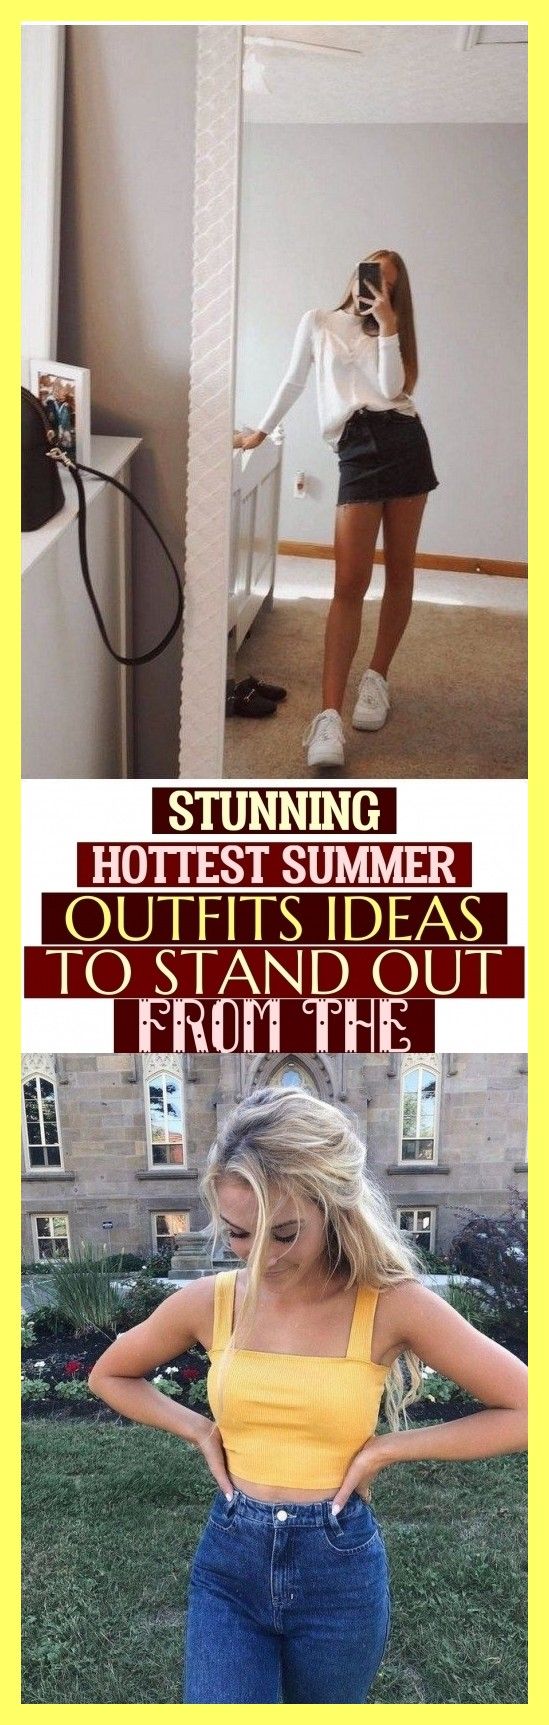 Stunning Hottest Summer Outfits Ideas To Stand Out From The ~ #summeroutfits ate…